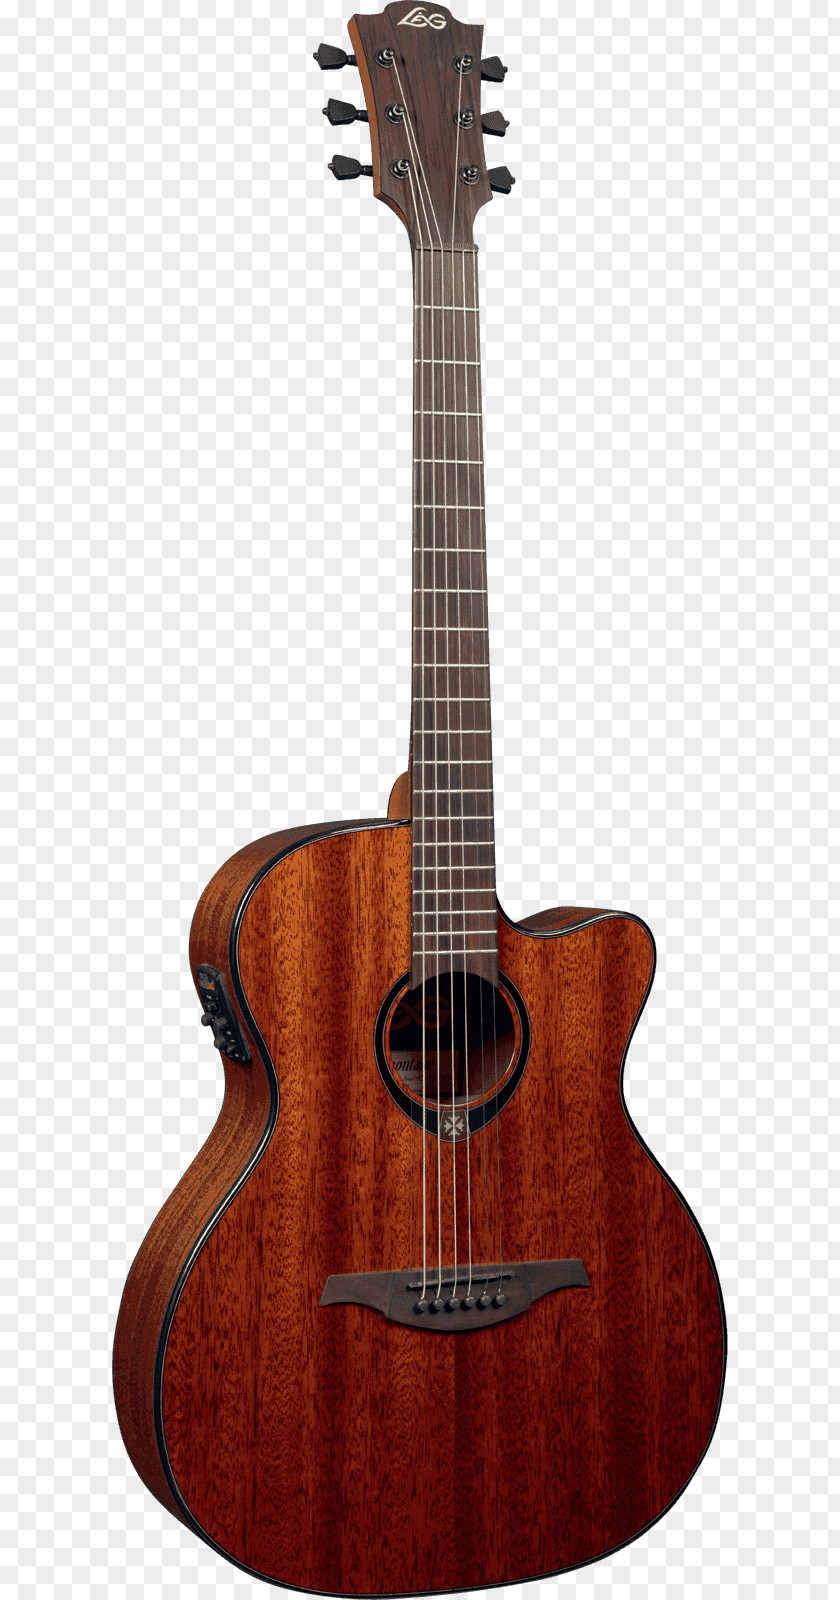 Acoustic Guitar Dreadnought Musical Instruments Takamine Guitars PNG